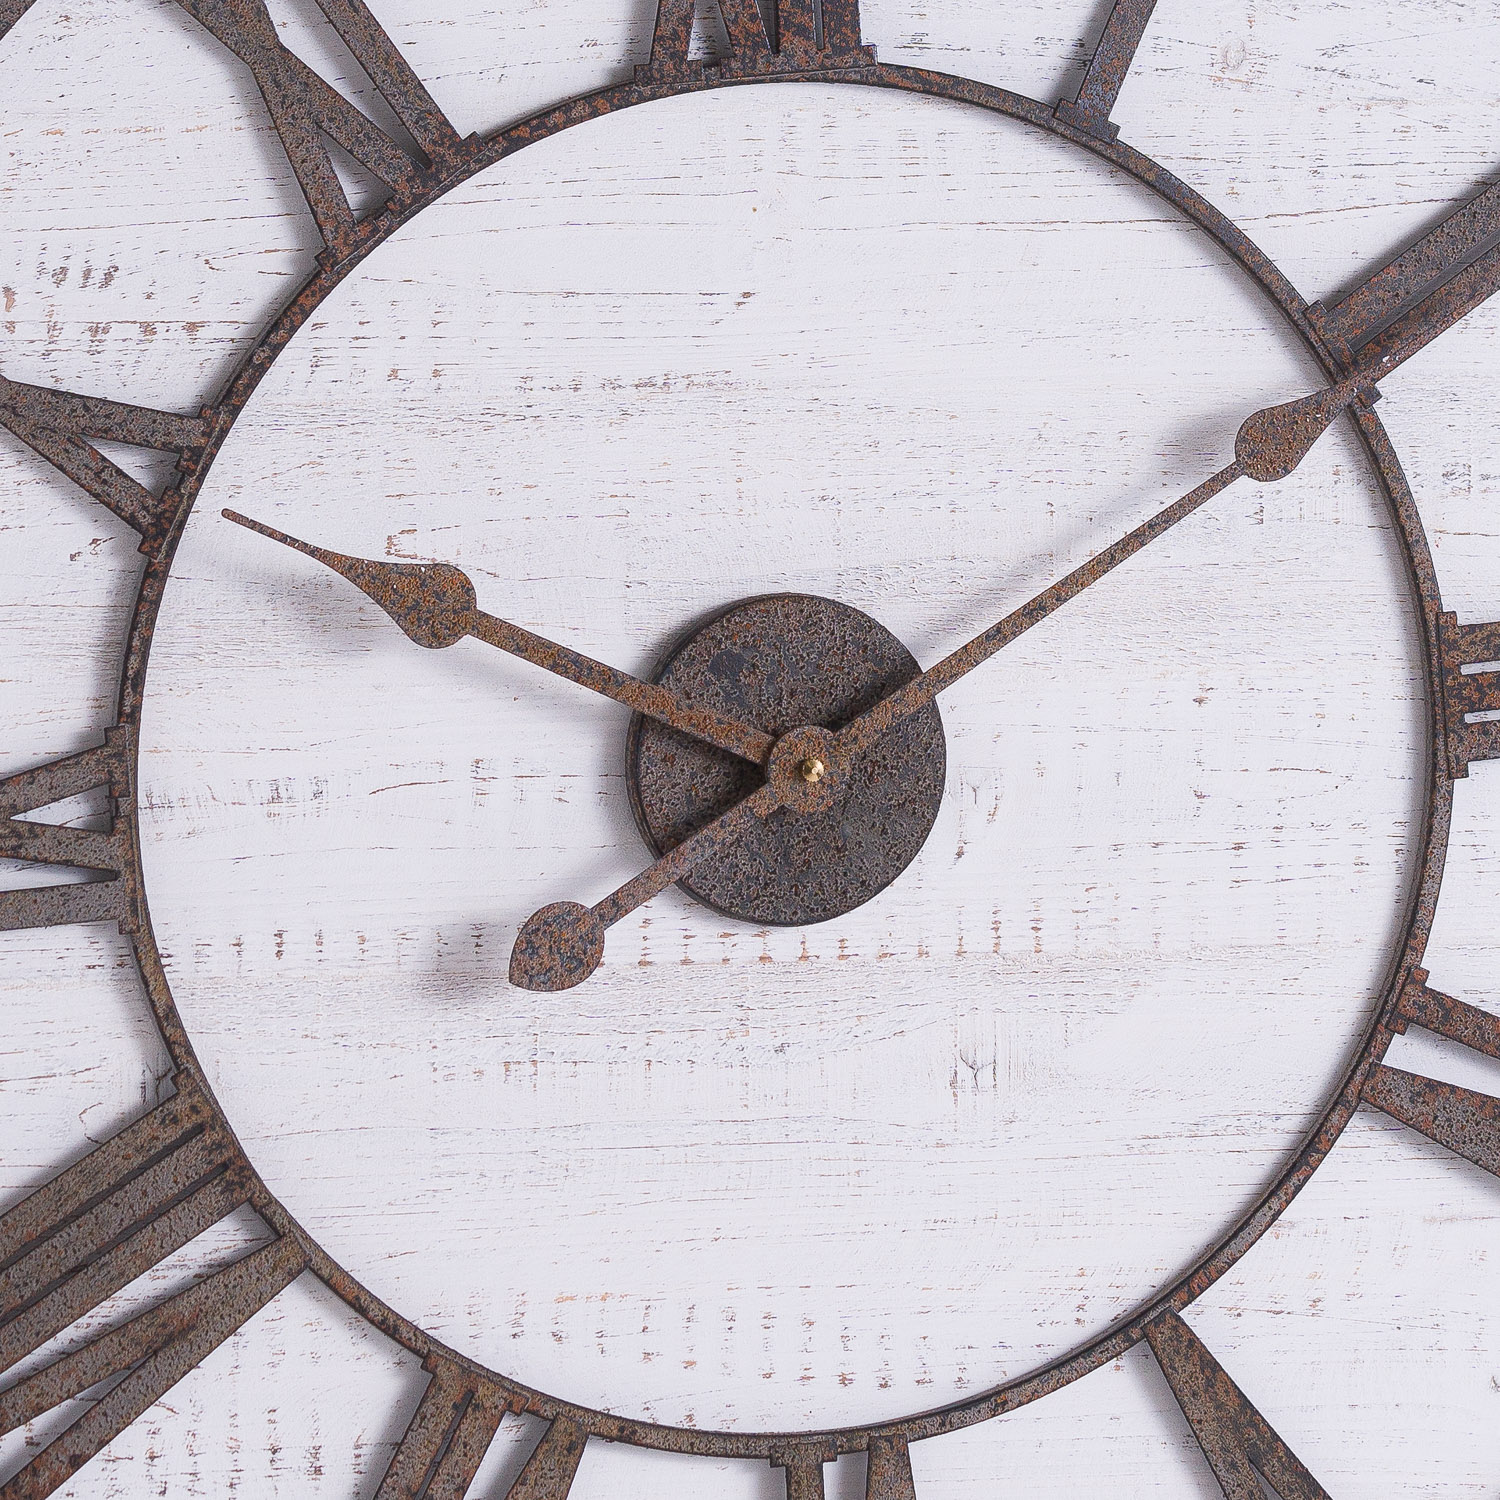 Rustic Wooden Clock With Aged Numerals And Hands - Image 2